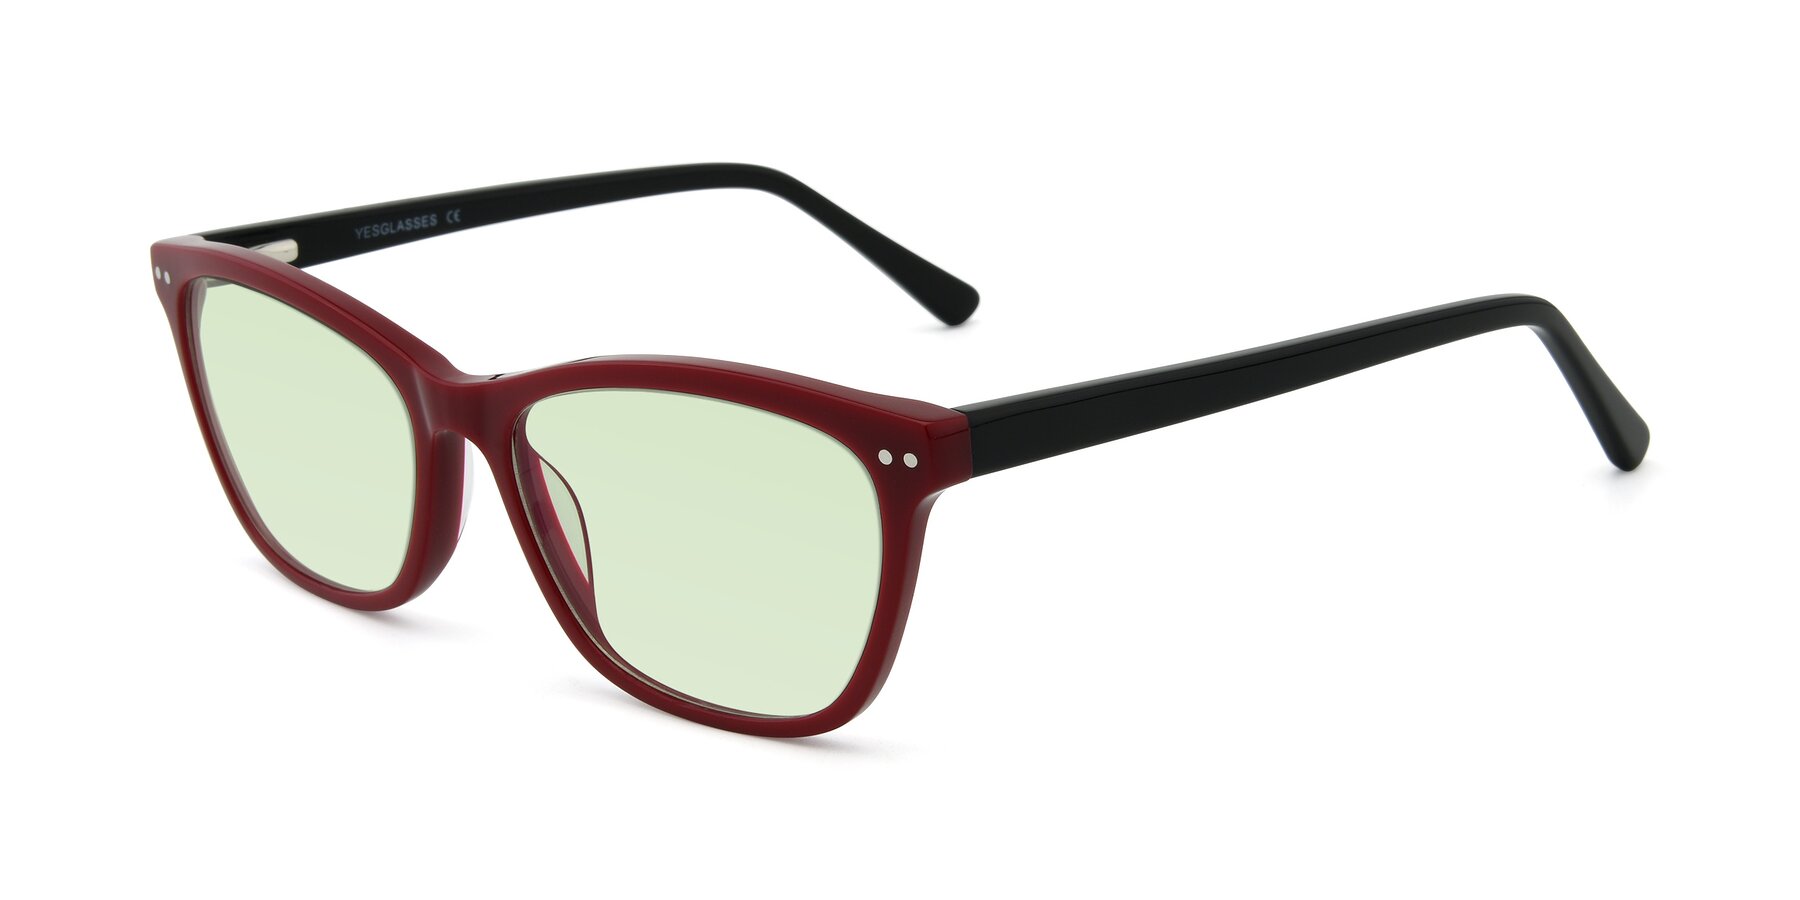 Angle of 17350 in Wine with Light Green Tinted Lenses